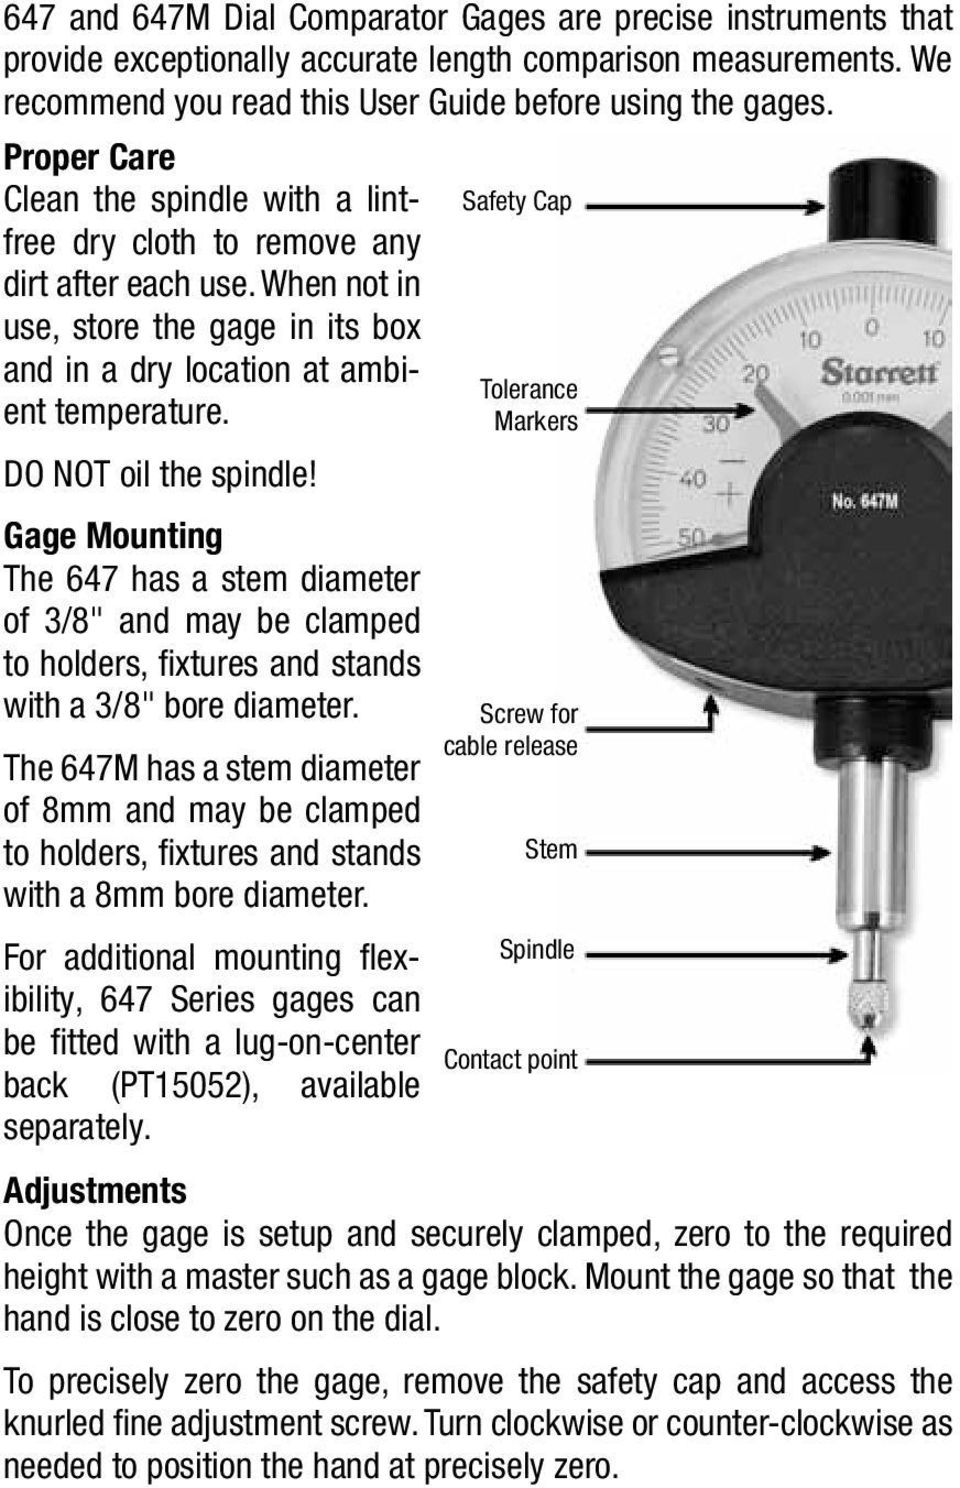 DO NOT oil the spindle! Gage Mounting The 647 has a stem diameter of 3/8" and may be clamped to holders, fixtures and stands with a 3/8" bore diameter.